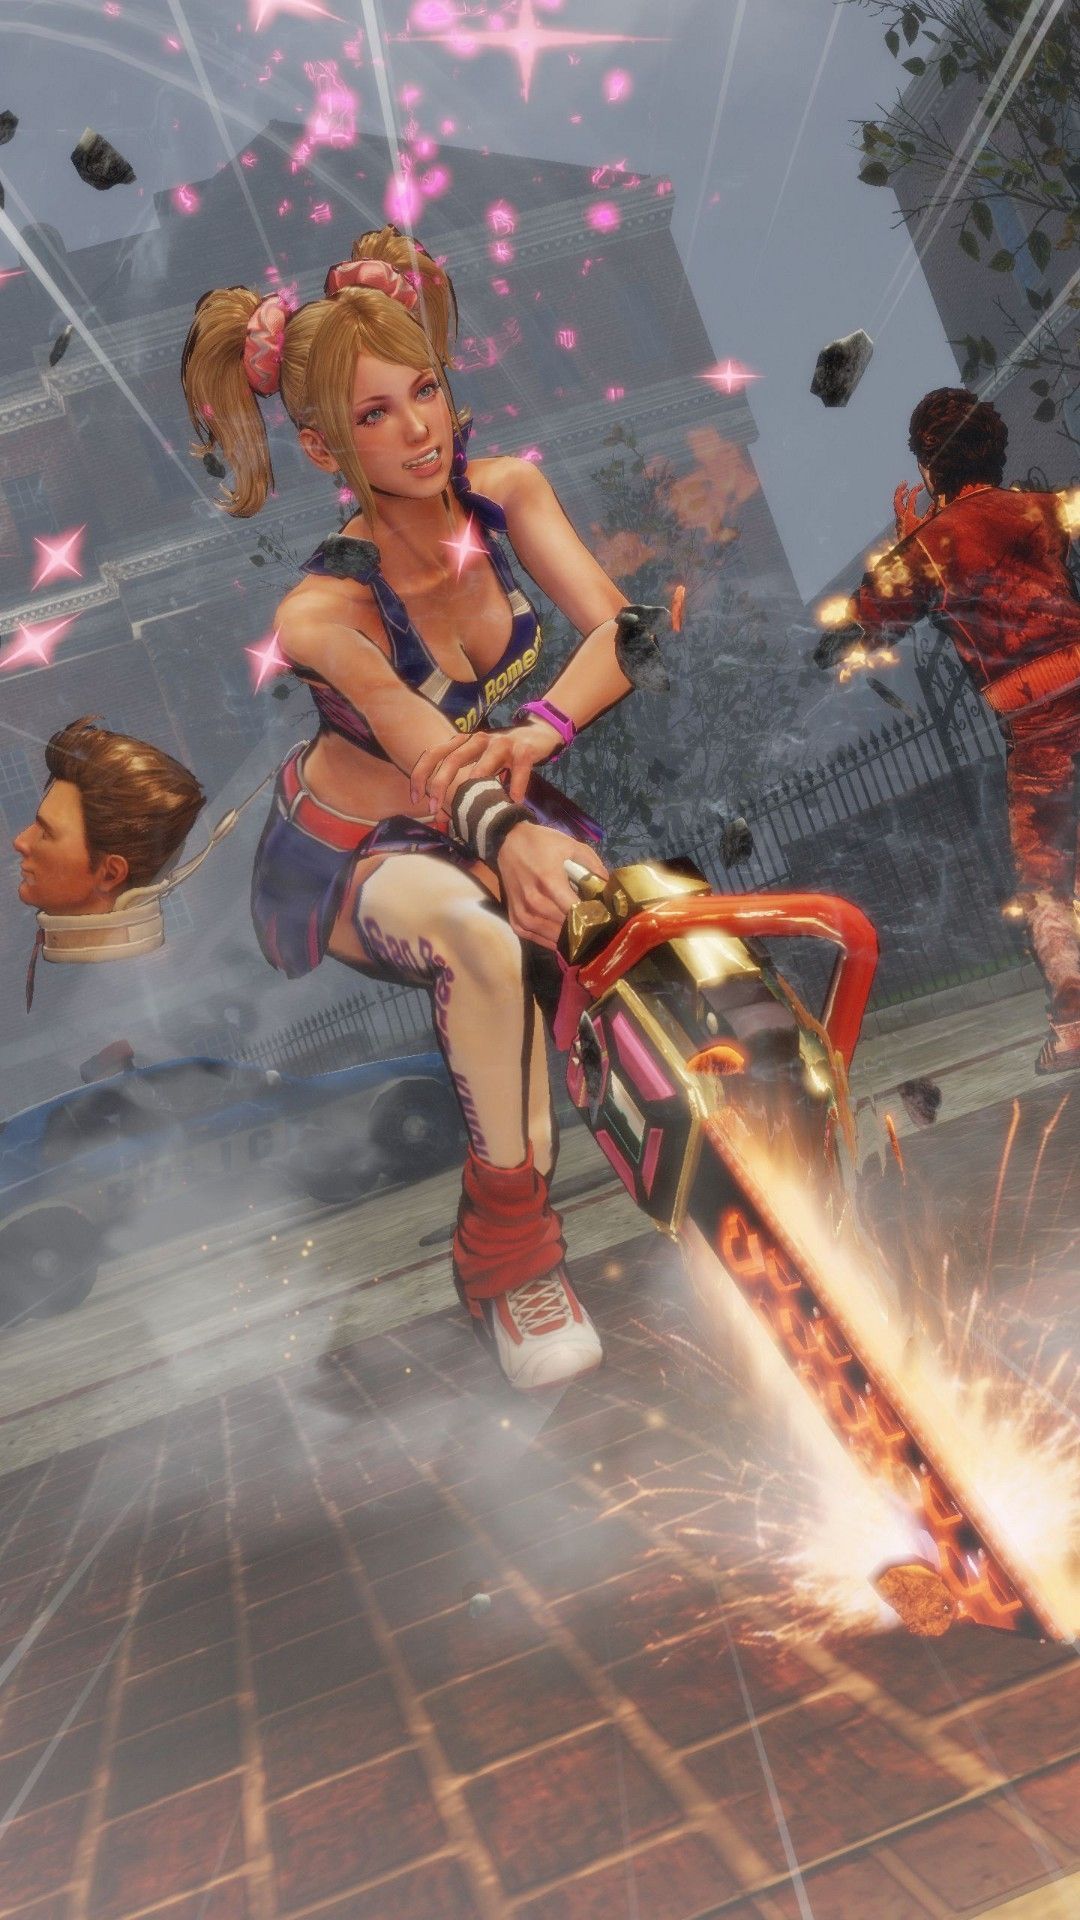 is lollipop chainsaw backwards compatible on xbox one